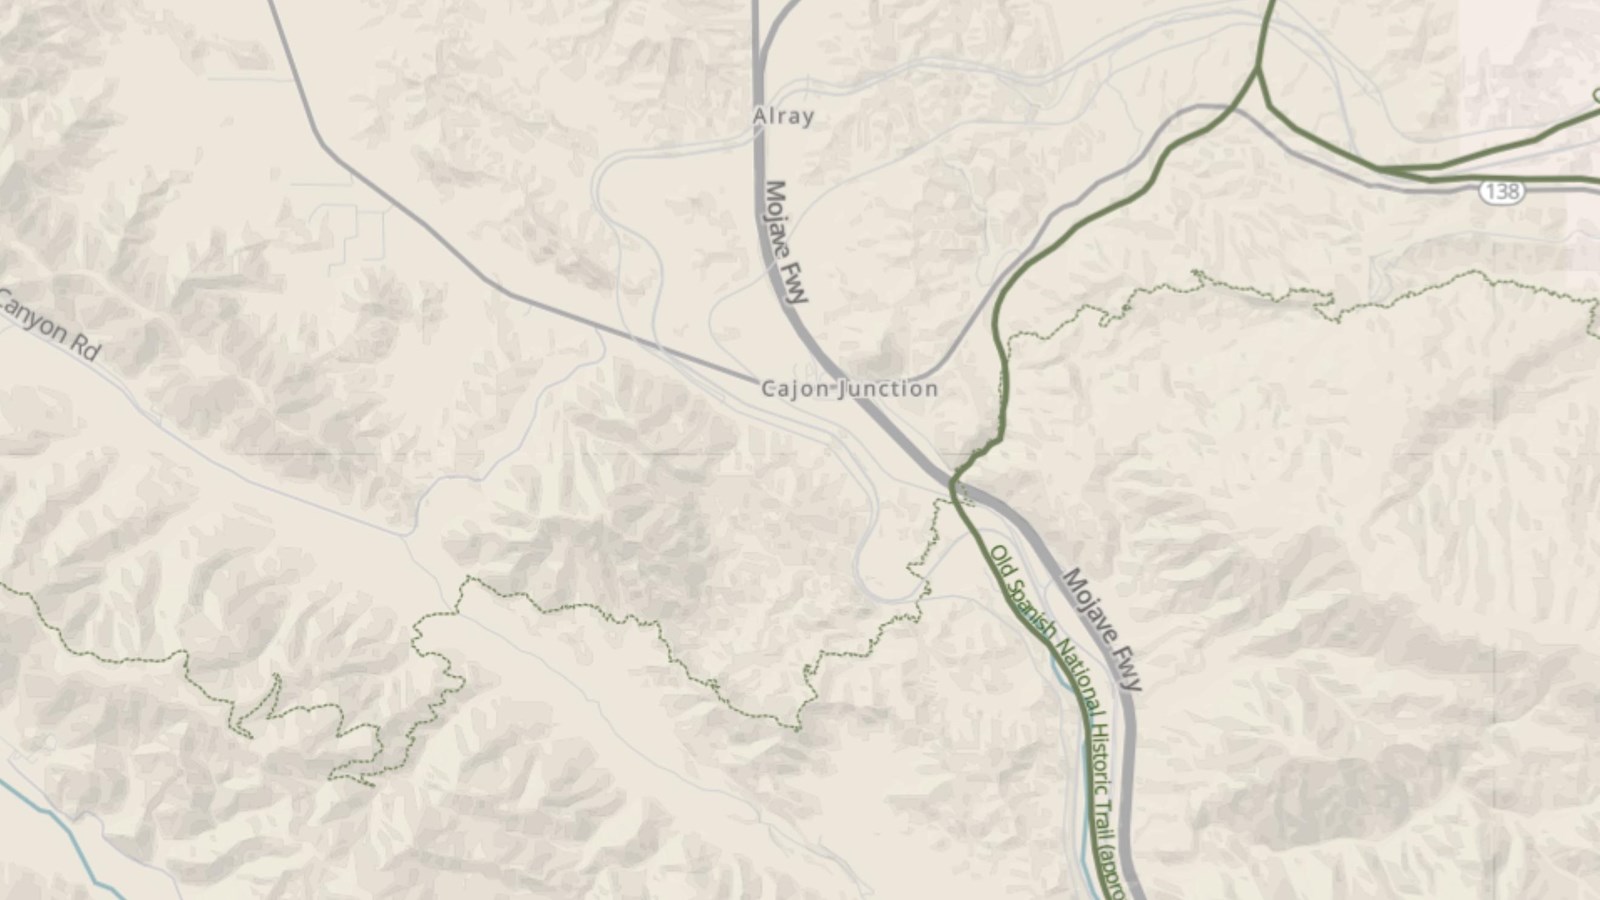 A map of the Cajon Pass area, showing the Old Spanish Trail, Interstate 15, Highway 138, and the PCT